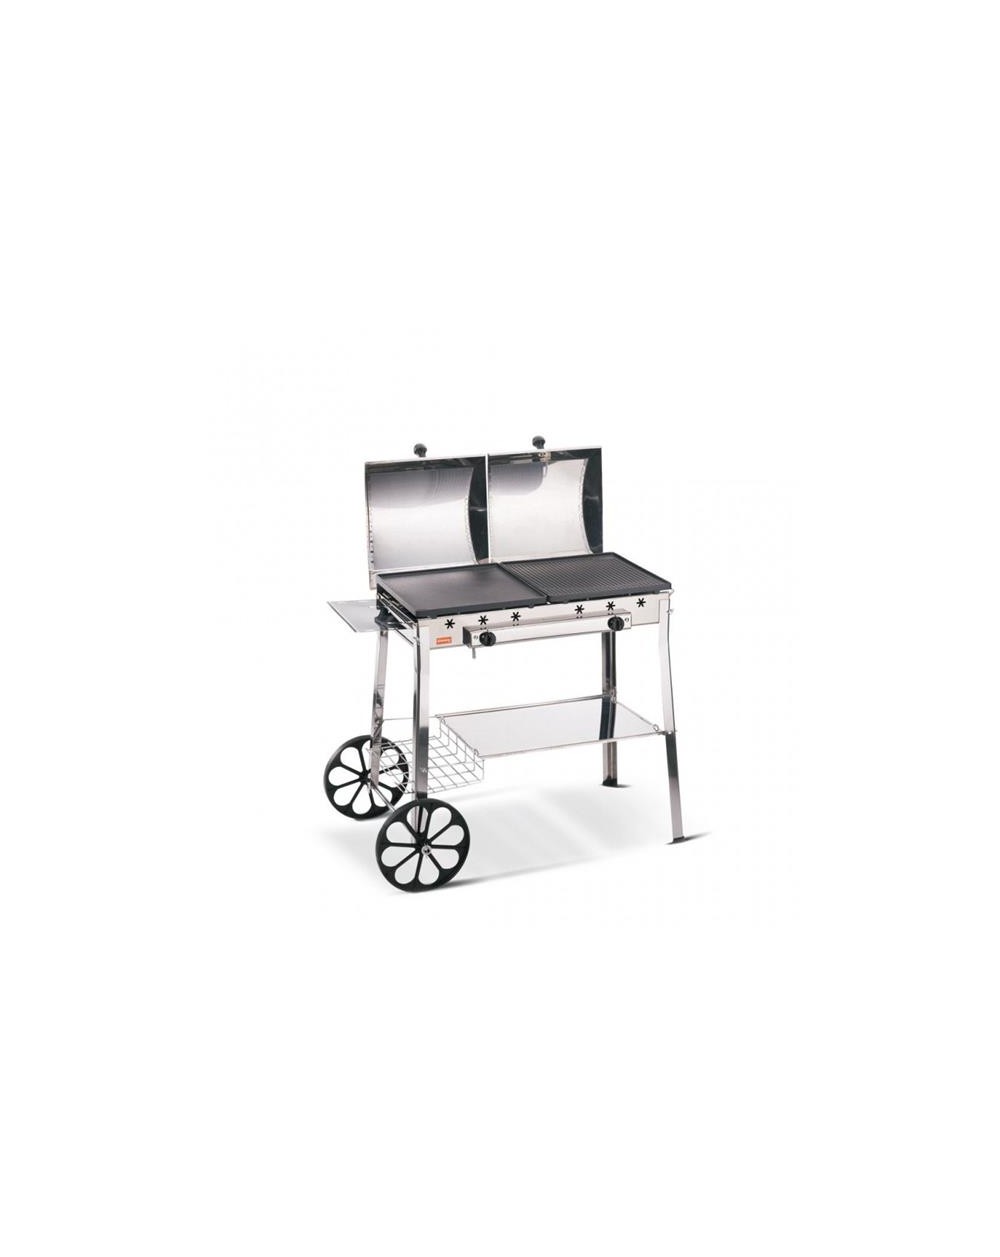 BARBECUE STEREO C/COP.95 GHISAGAS  A073334